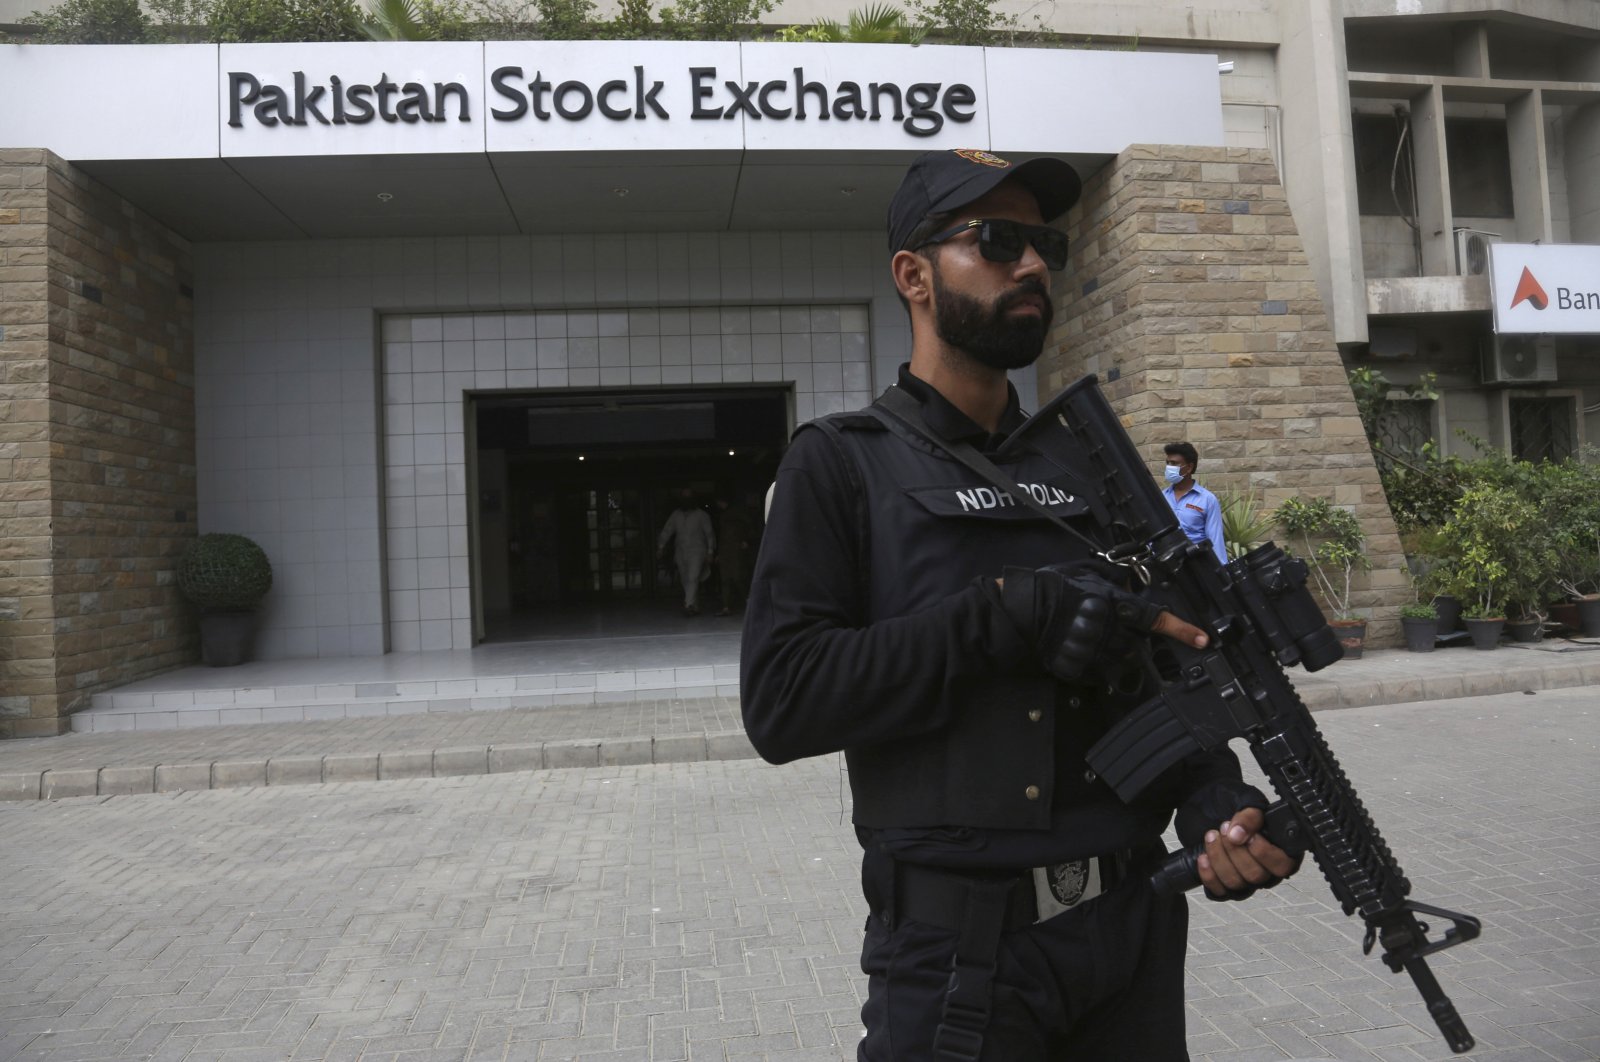 A police commando stands guard outside the Pakistan Stock Exchange after an attack in Karachi, Pakistan, June 29, 2020. (AP Photo)